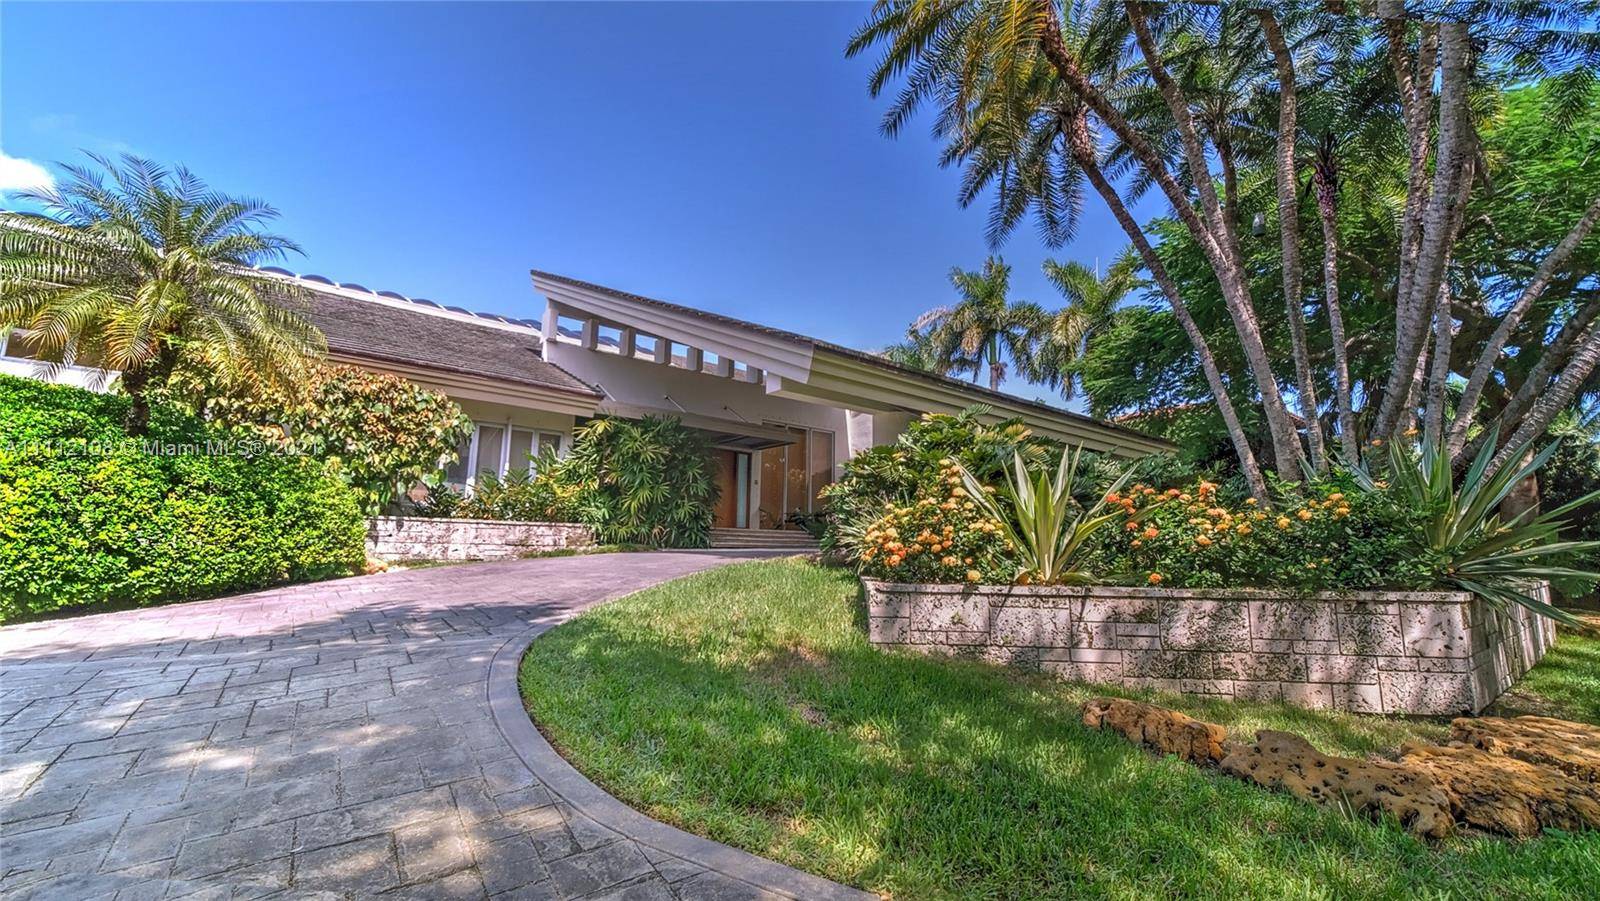 Fabulous Miami Modern waterfront home in glamorous, gated Gables Estates boasts grandly scaled dbl height interiors and cascading natural light.